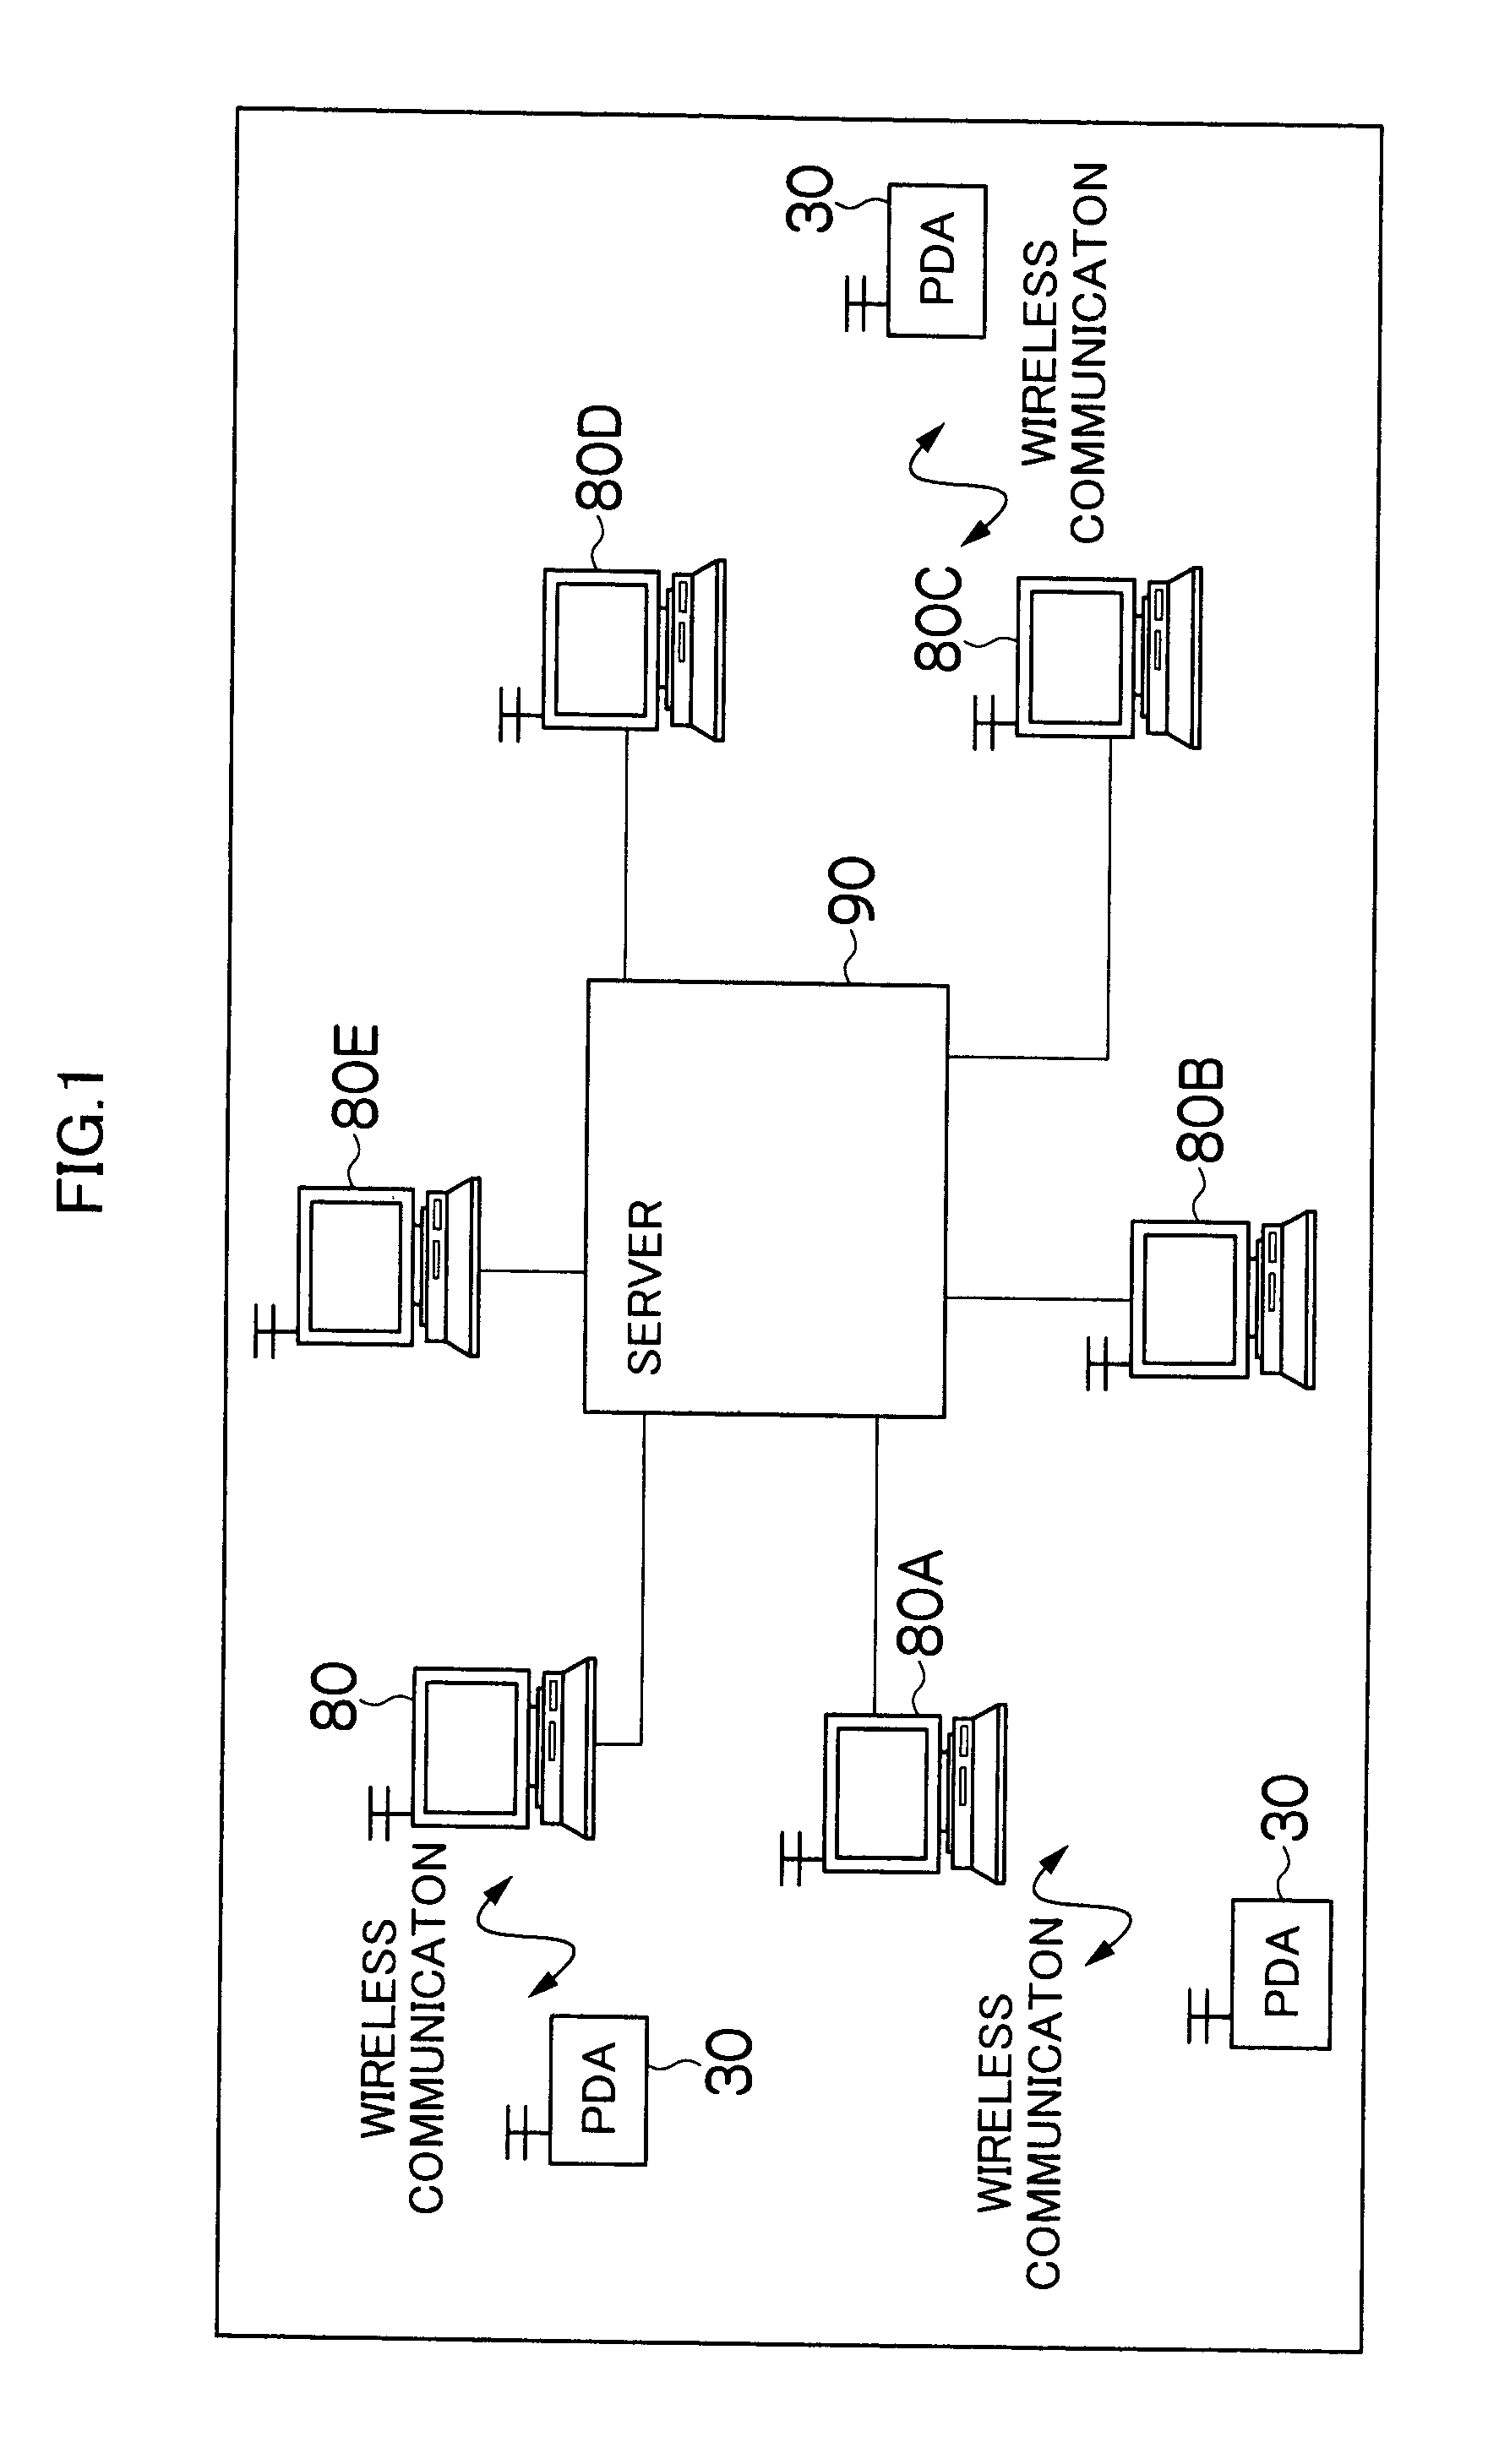 Customer solicitation support system and information provision server